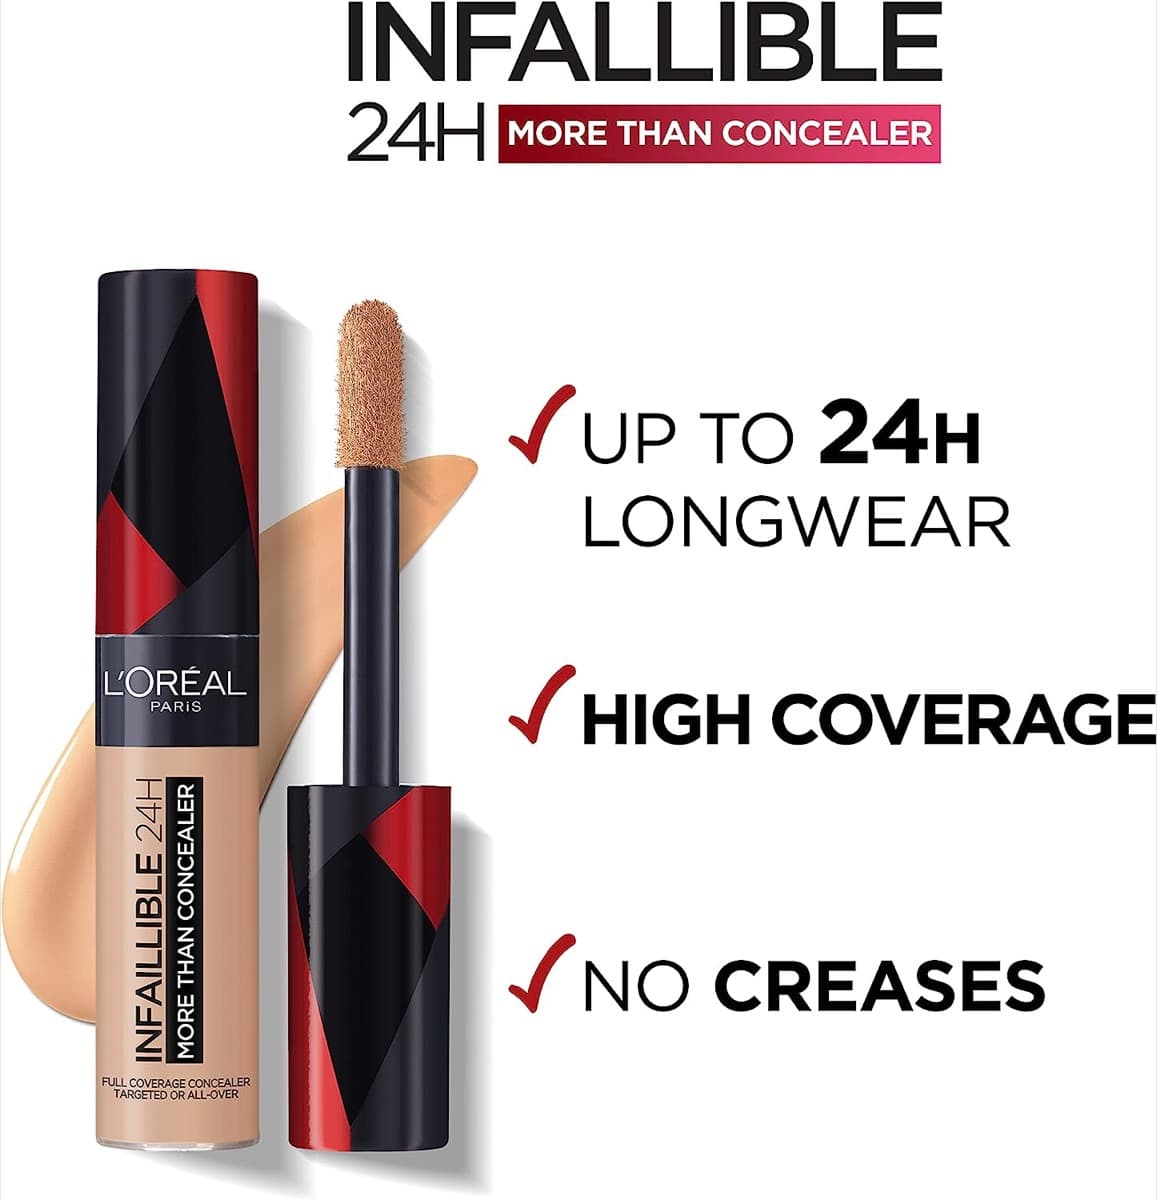 Correttore Infaillible 24H More Than Concealer